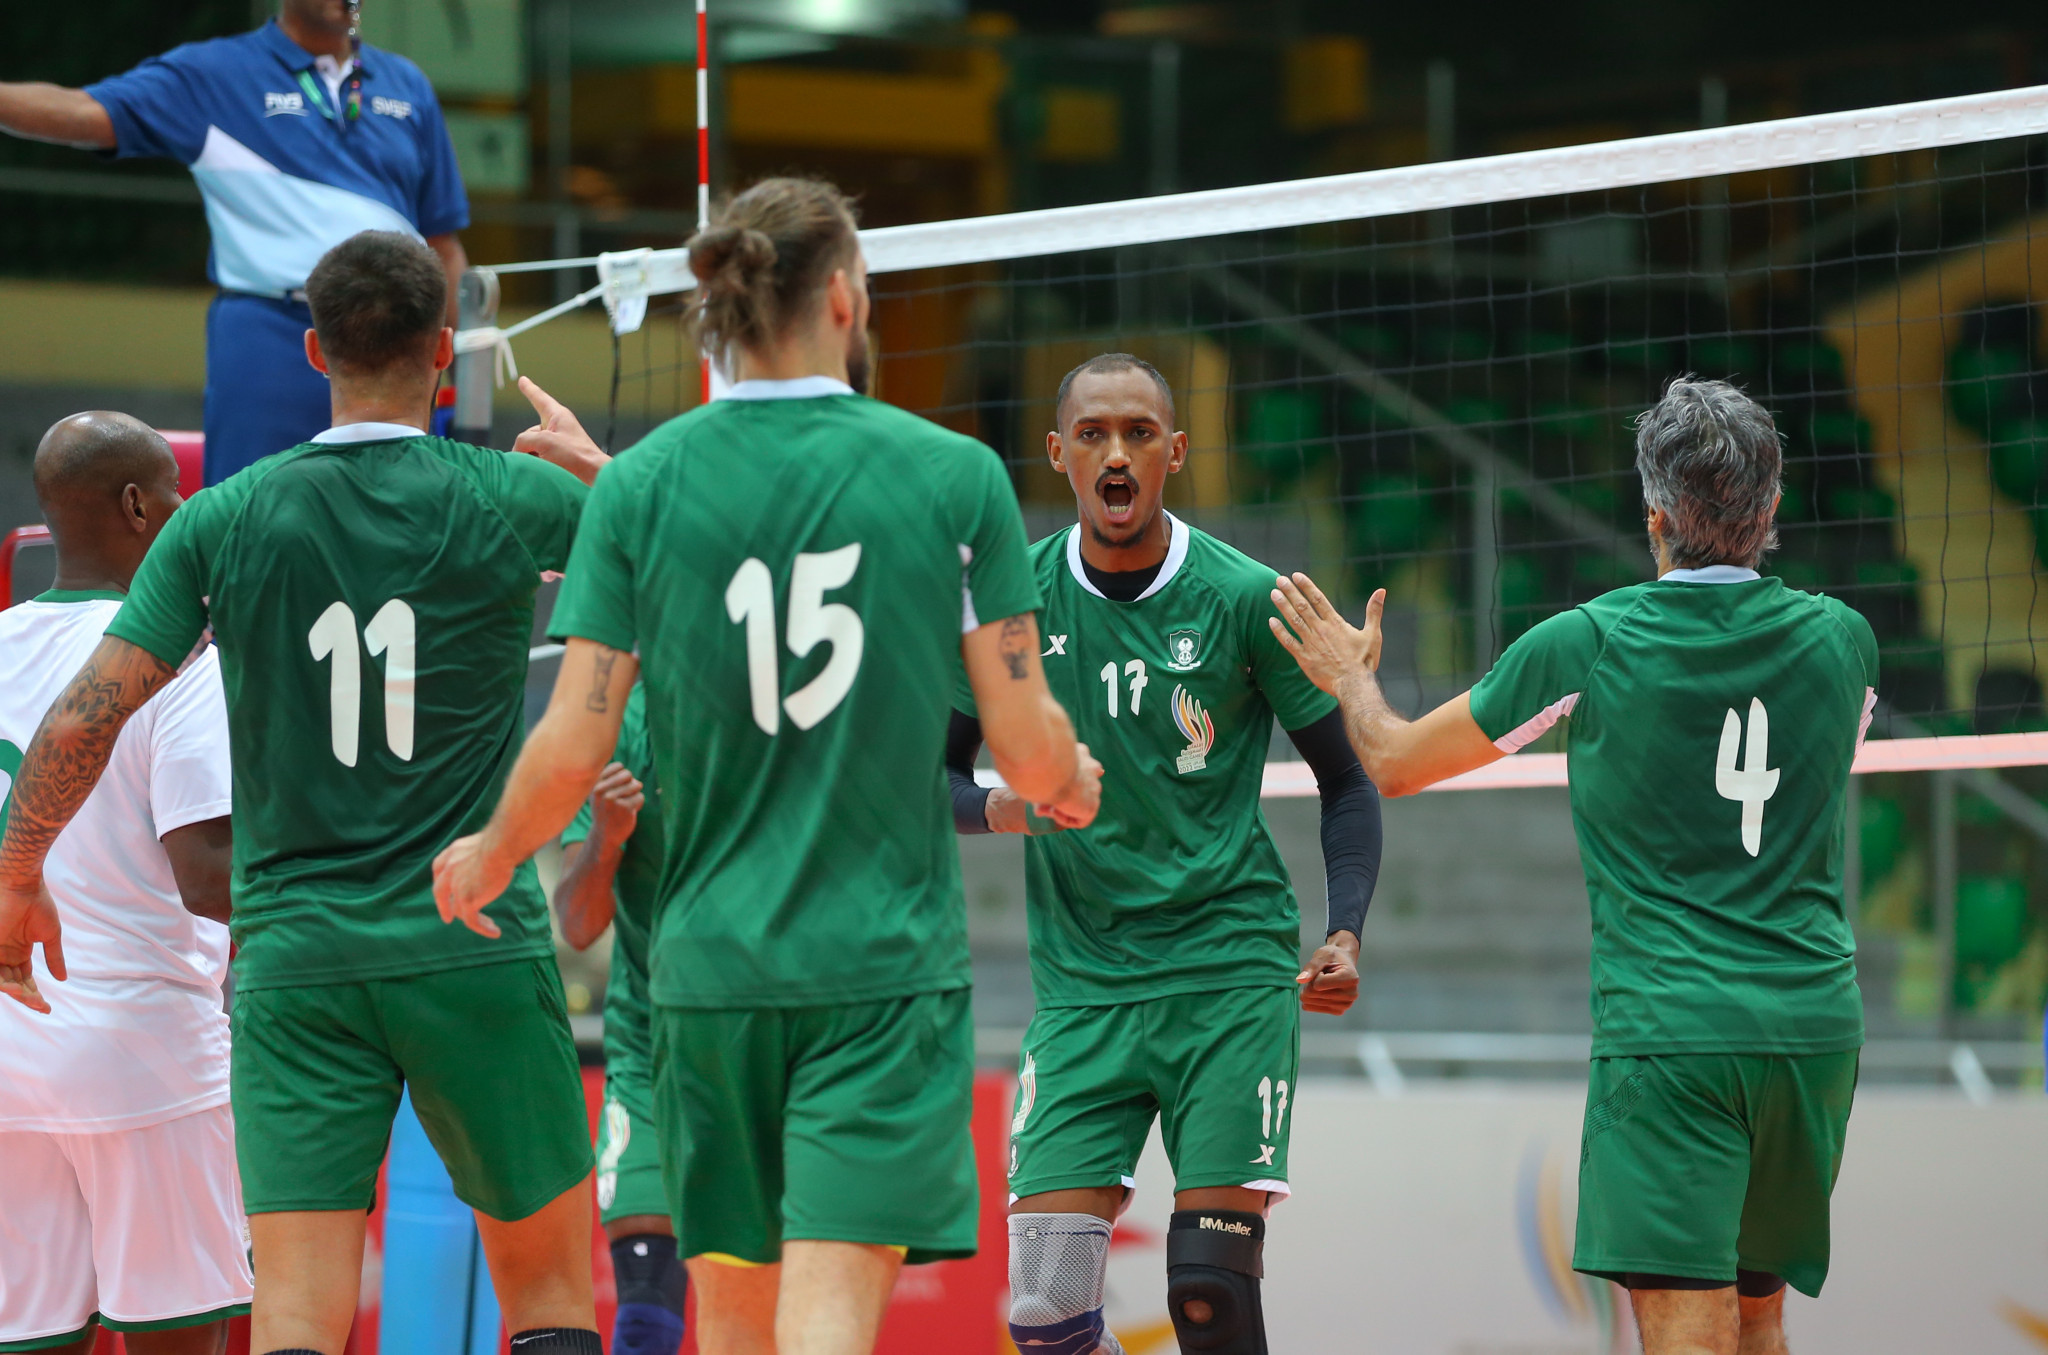 Volleyball medals were also decided on day ten of the Saudi Games ©Saudi Games